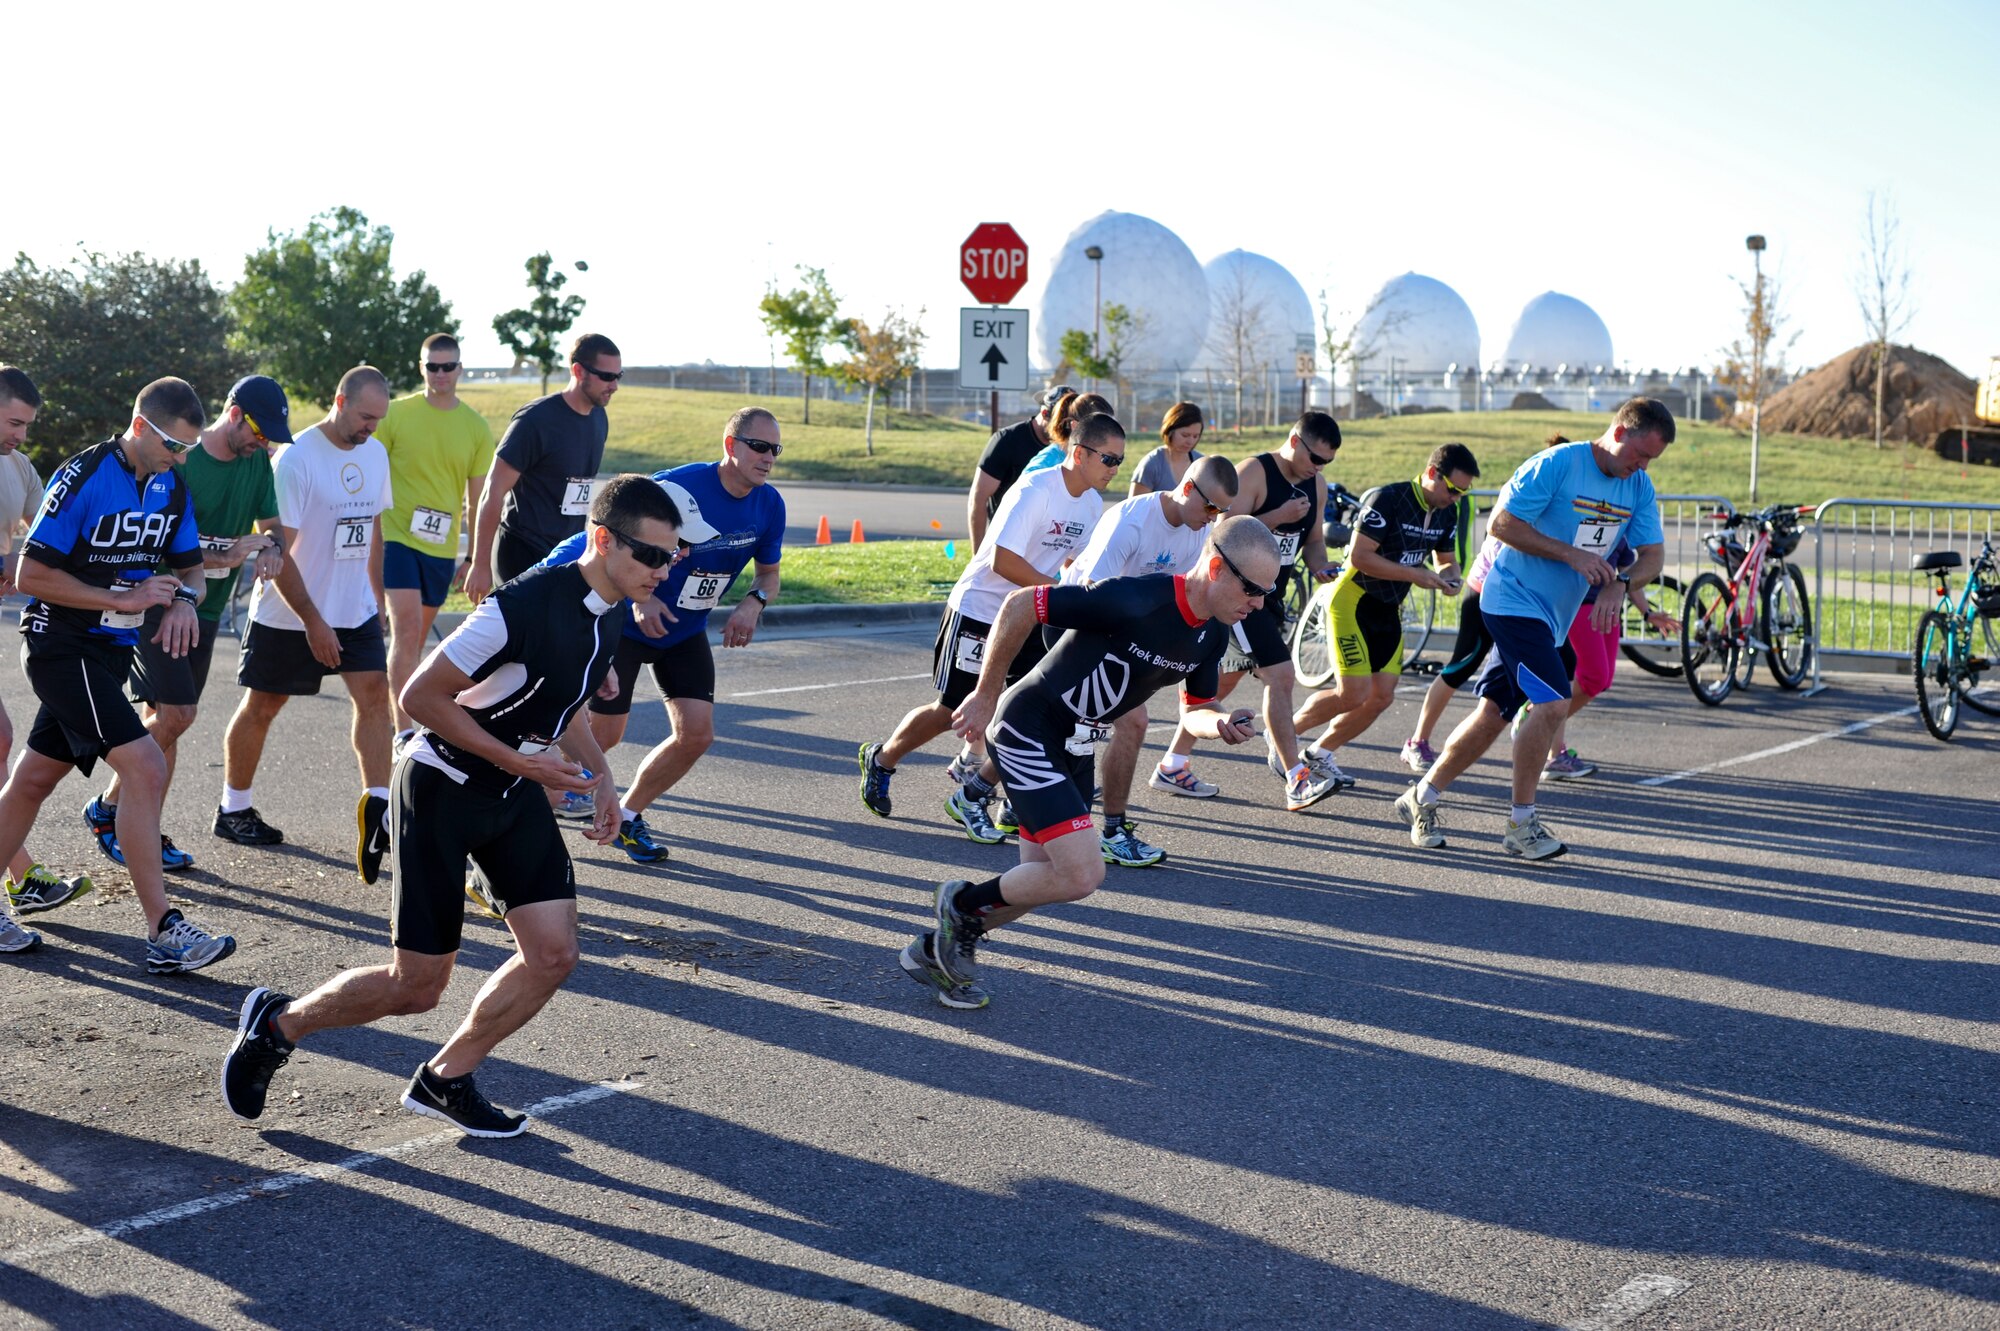 Team Buckley members begin the 2 mile portion of the 2nd Annual Buckley Duathlon Sept. 19, 2013, on Buckley Air Force Base, Colo. The race started with a 2-mile run, followed by a 6-mile bike ride and finished with a 1.5-mile run. (U.S. Air Force photo by Airman 1st Class Riley Johnson/Released)